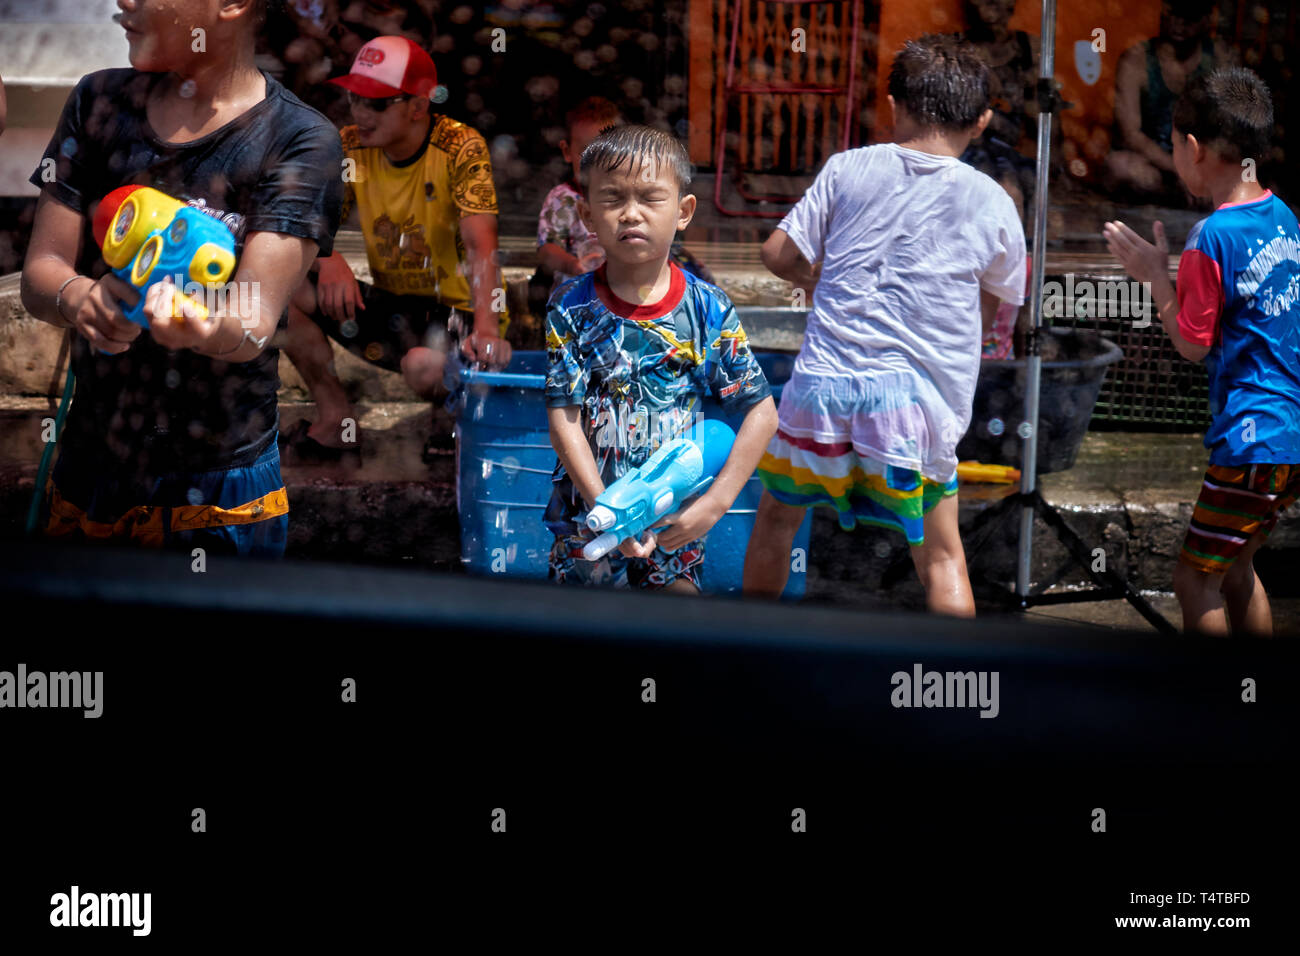 Songkran Thailand. New Year and water festival 2019 with youngsters enjoying the fun and using water guns to spray passers by. Stock Photo